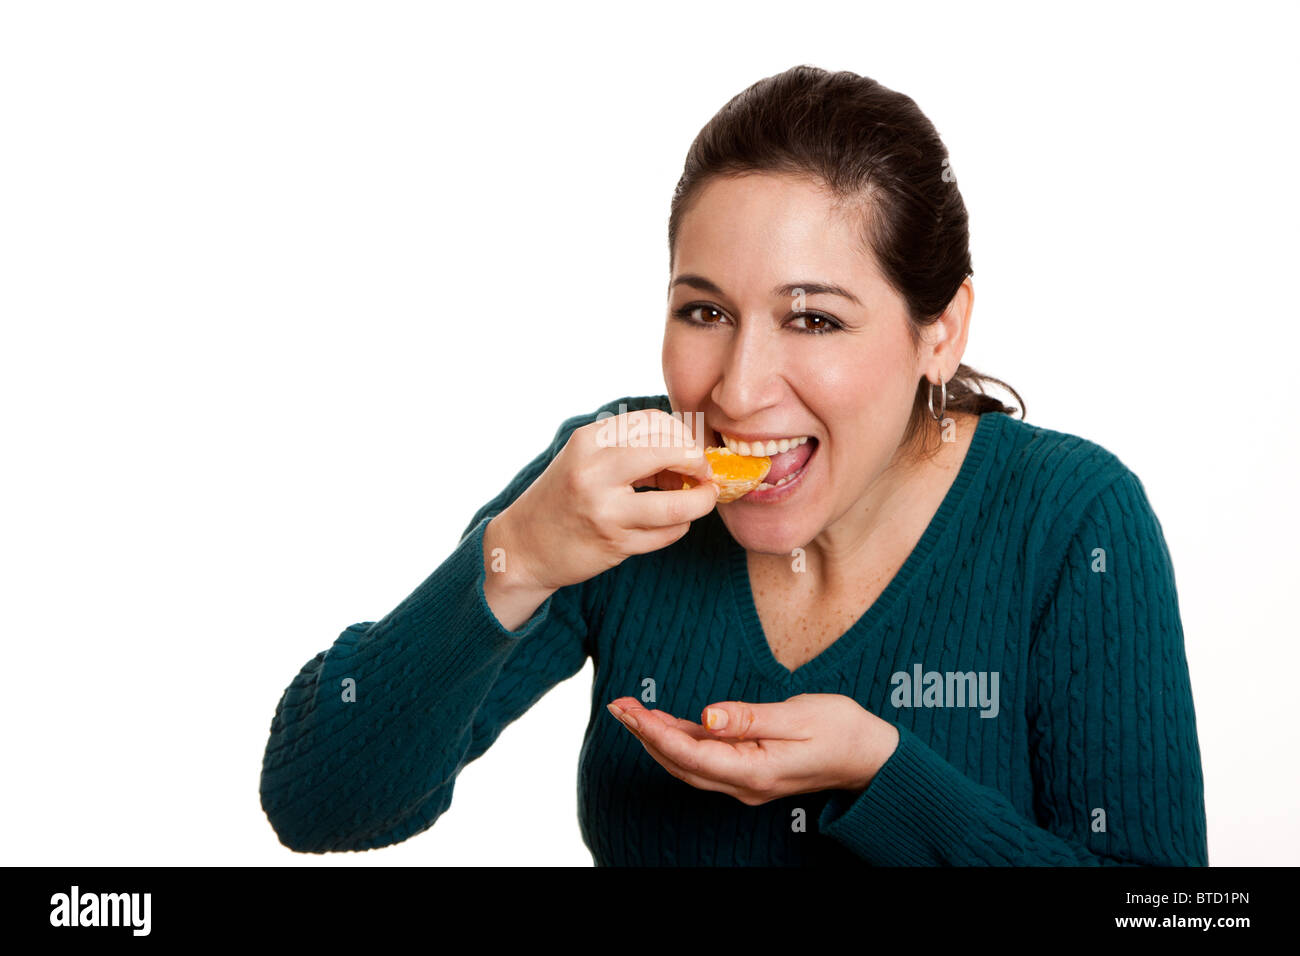 Beautiful happy woman eating a slice of juicy mandarin orange fruit full of vitamin C for a healthy diet, isolated. Stock Photo